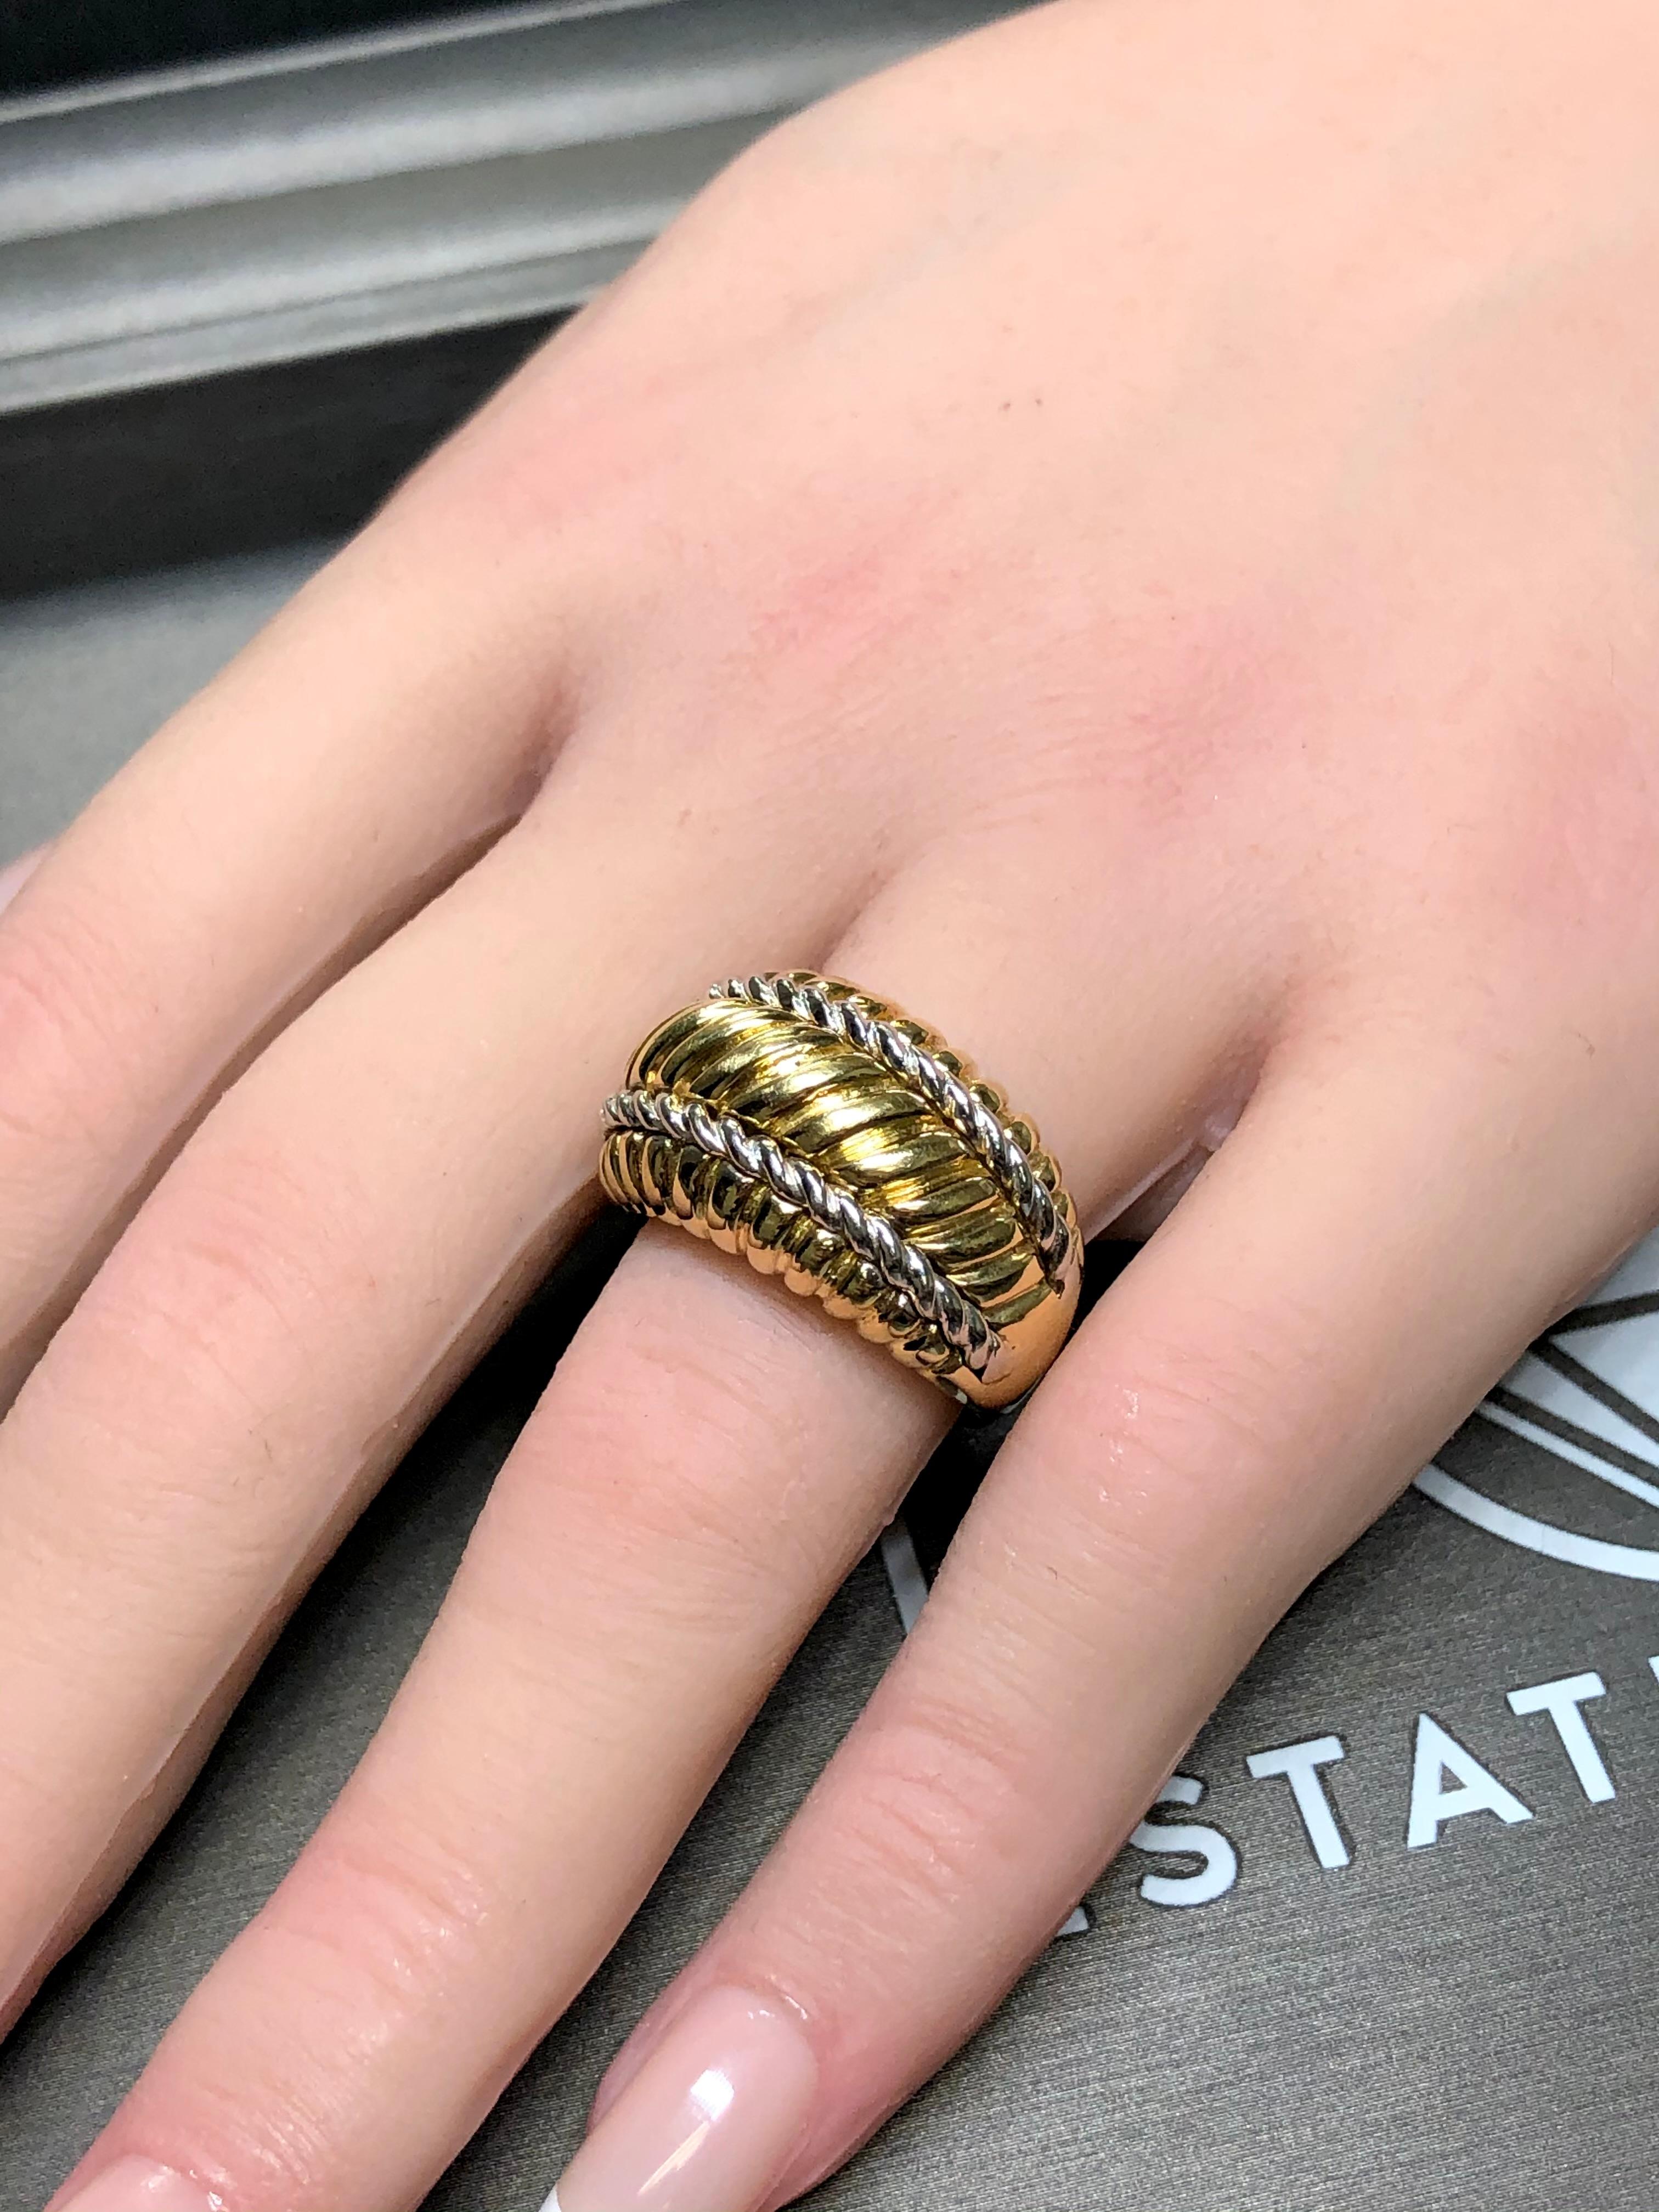 ROBERTO COIN 18K Scallop Rope Dome Cocktail Two Tone Ring Sz 7.75 For Sale 1